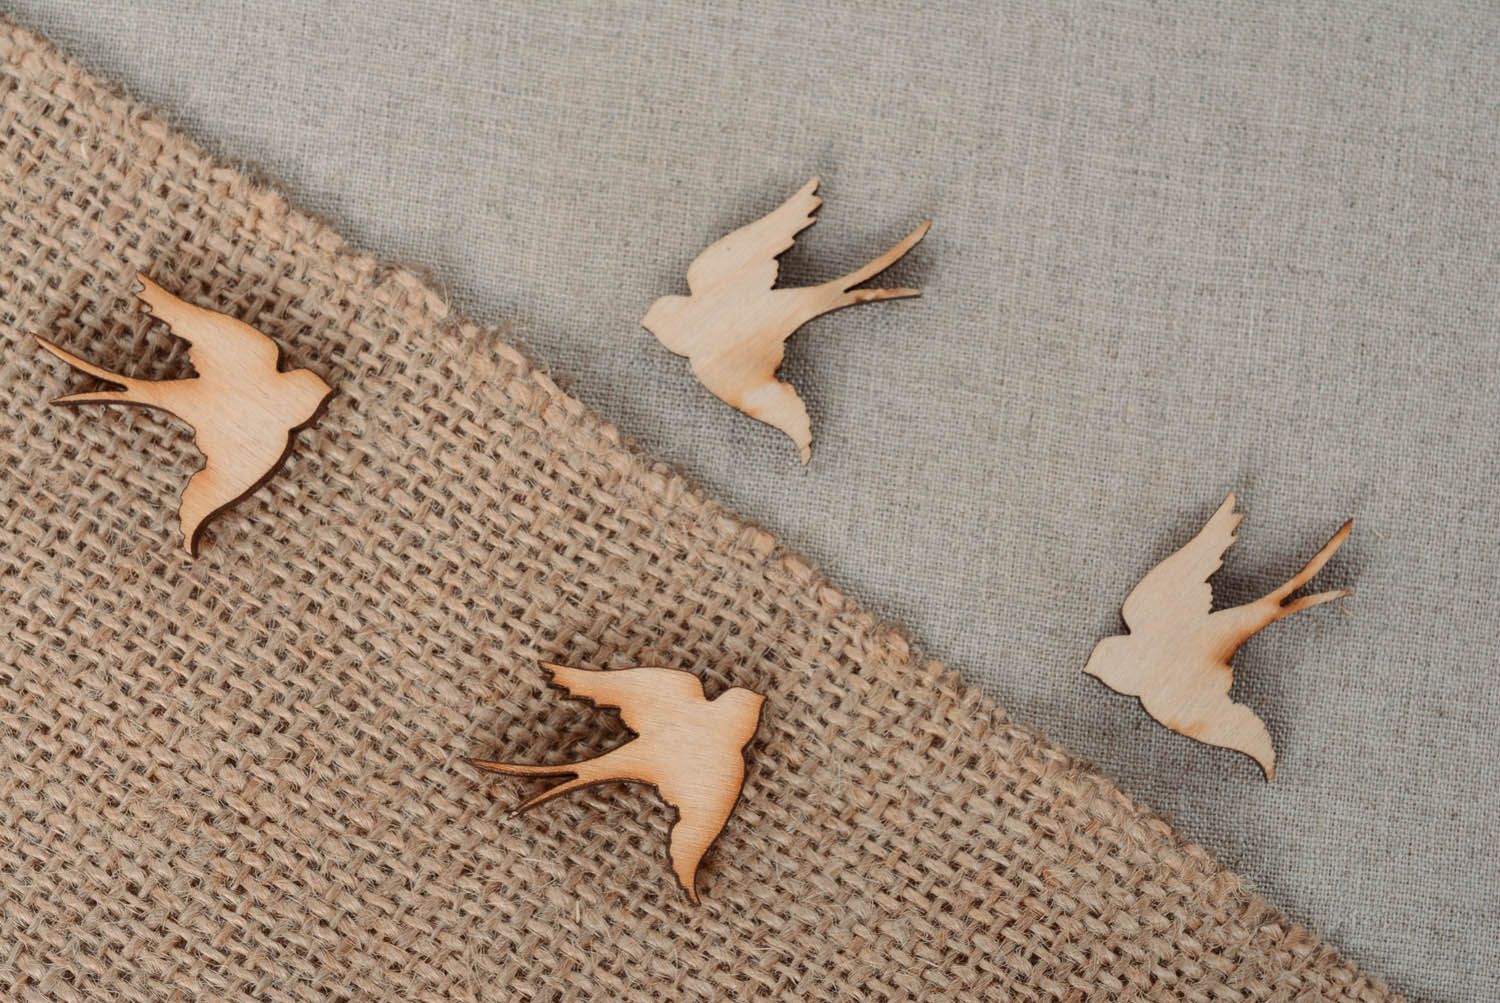 Homemade chipboard Swallow photo 2